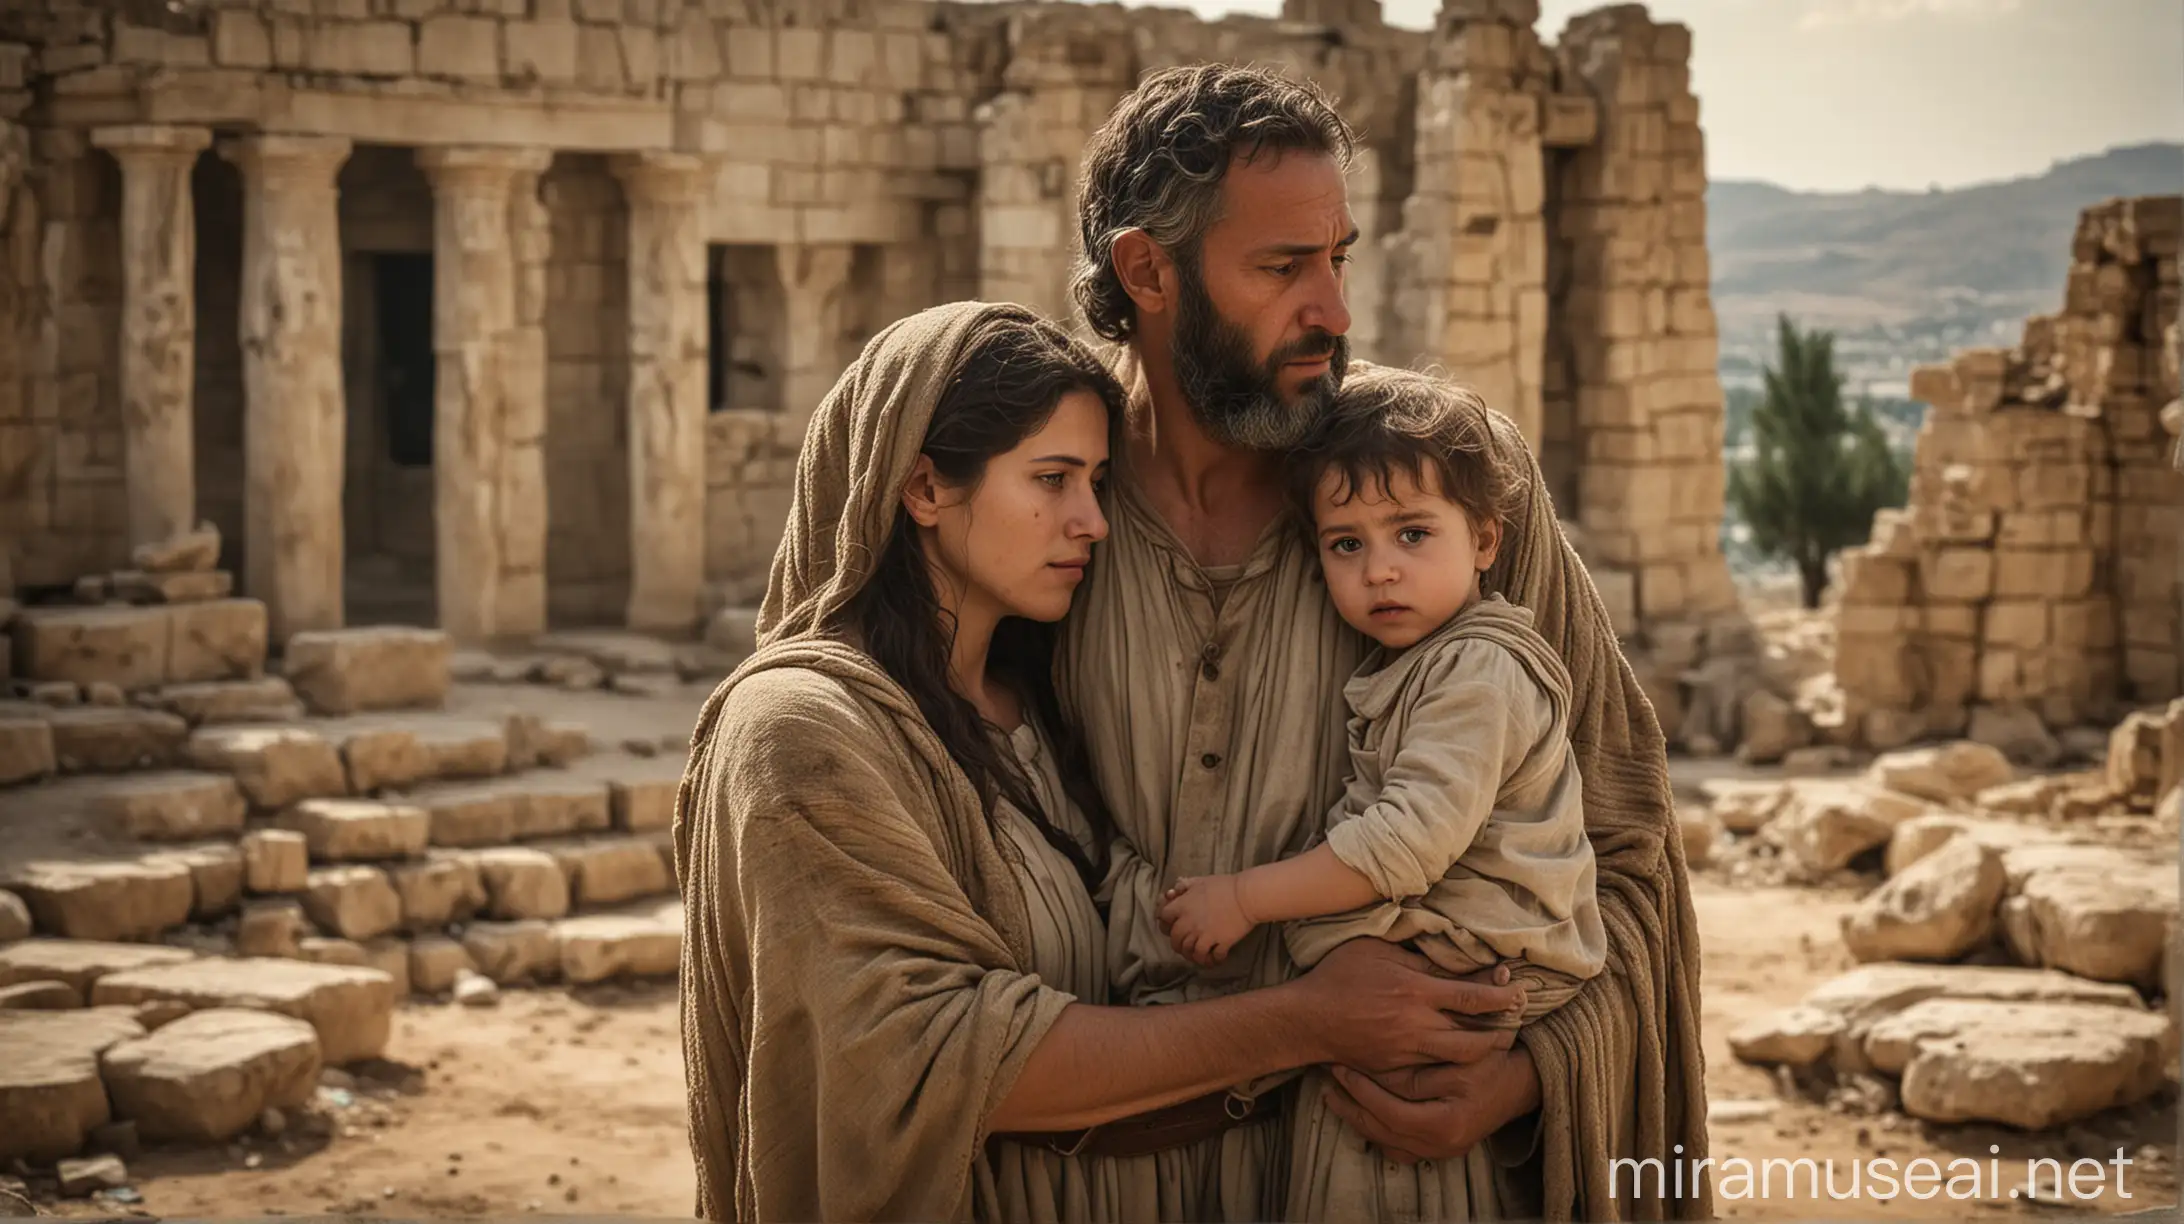 A family standing together, surrounded by a backdrop of ancient Israel, with a sense of sadness and loss etched on their faces. The father is shown holding a small child, while the mother looks on with a mixture of grief and hope.In ancient world 